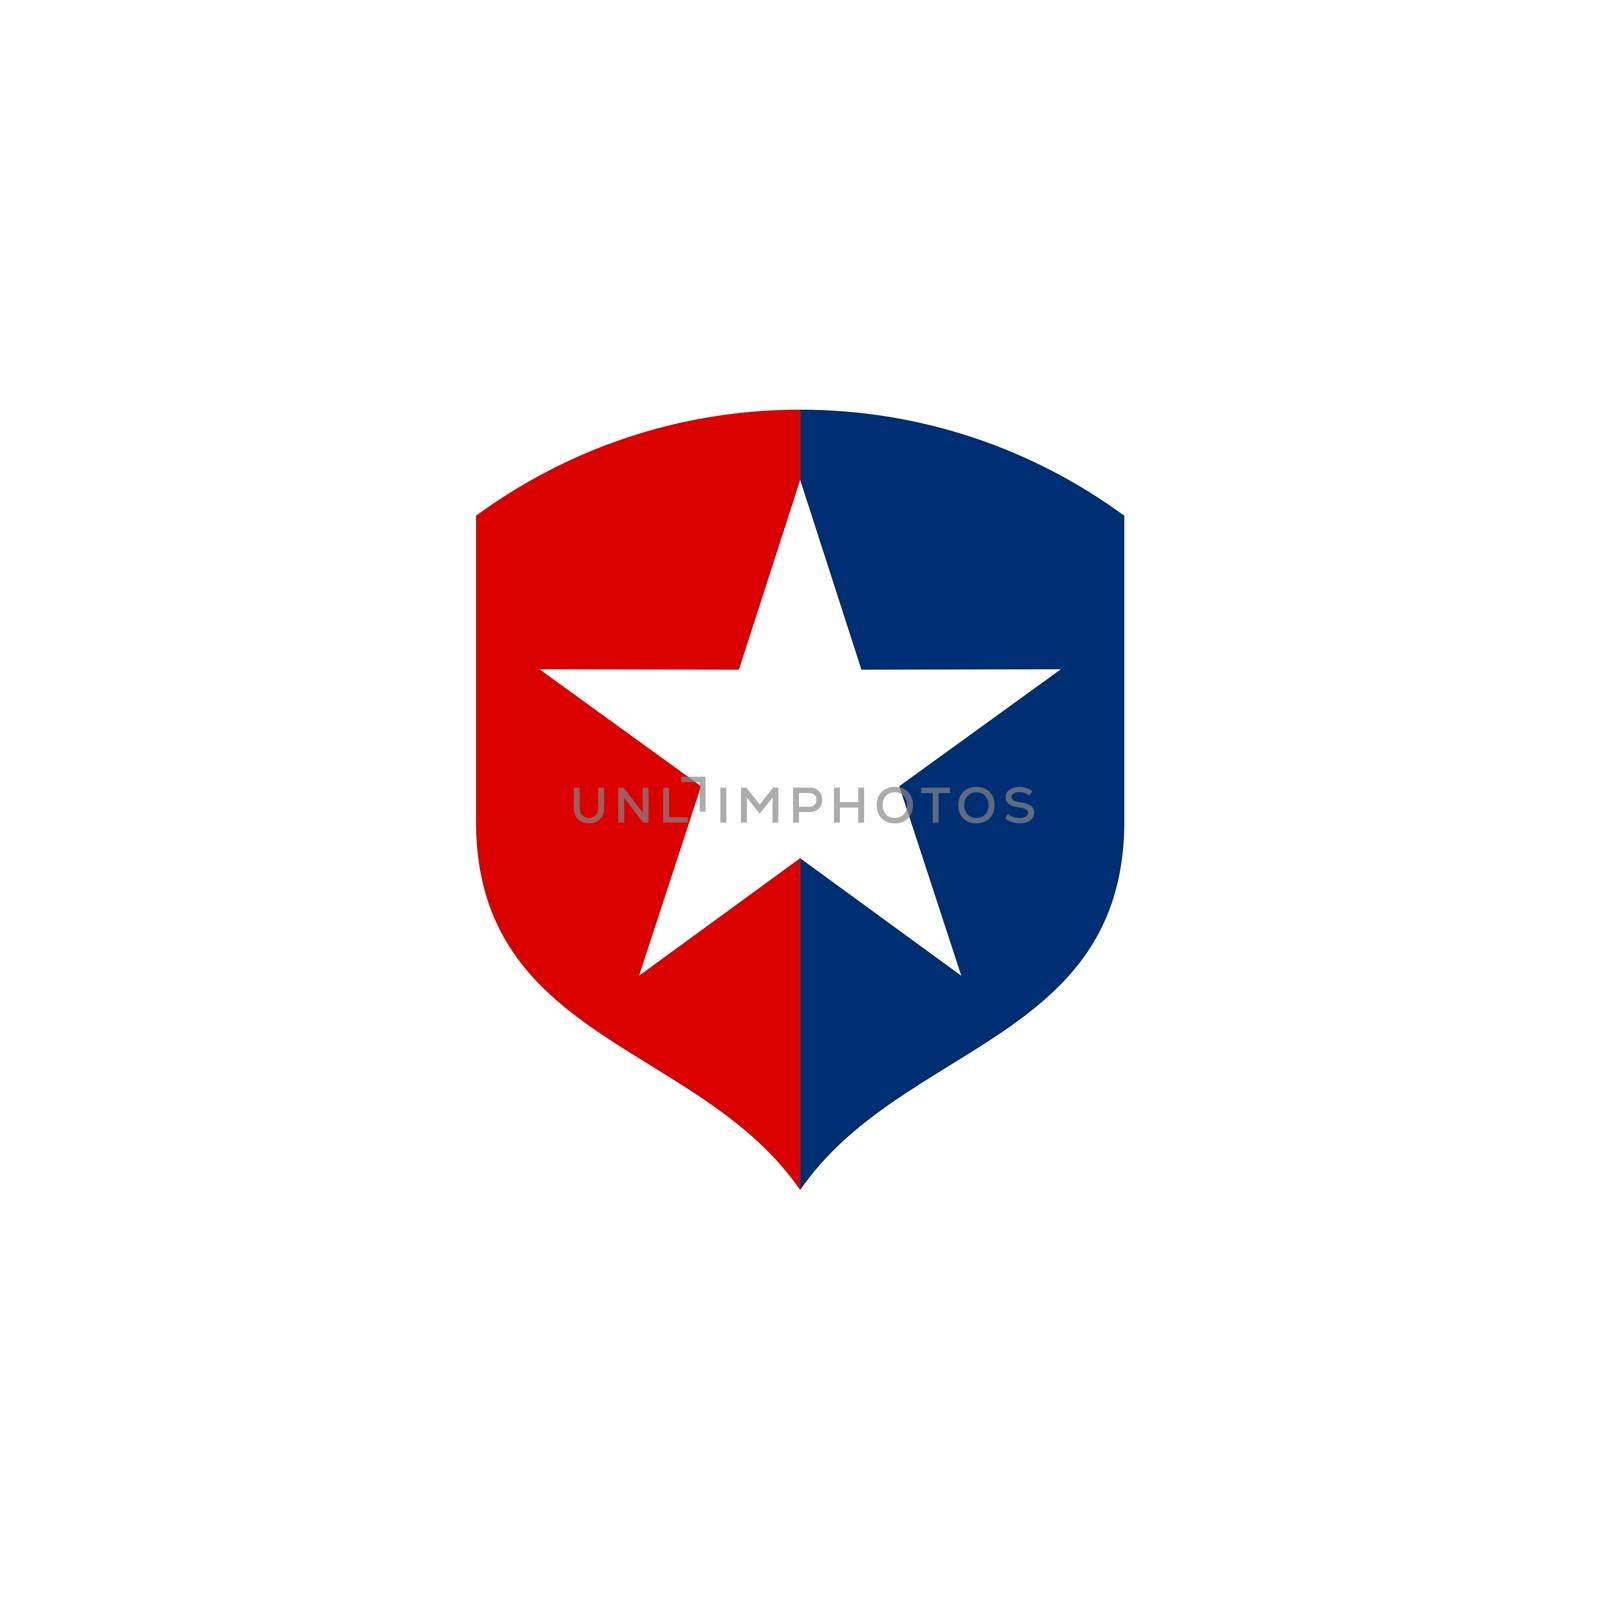 Law Office Star and Shield Logo Template Illustration Design. Vector EPS 10.